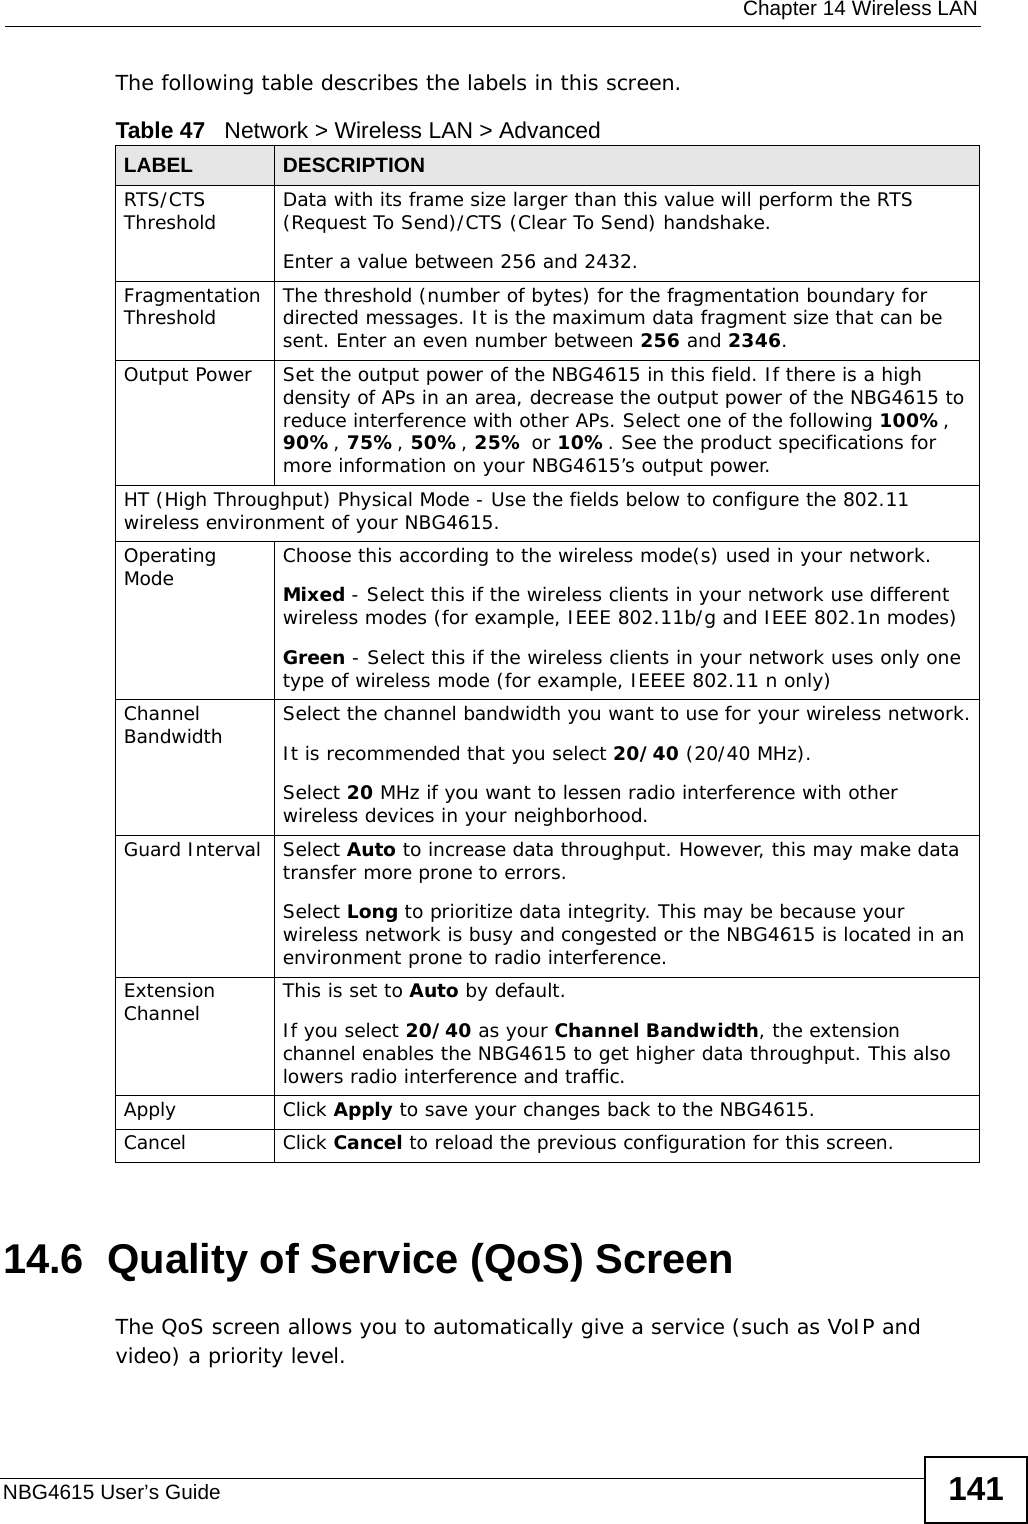  Chapter 14 Wireless LANNBG4615 User’s Guide 141The following table describes the labels in this screen. 14.6  Quality of Service (QoS) ScreenThe QoS screen allows you to automatically give a service (such as VoIP and video) a priority level.Table 47   Network &gt; Wireless LAN &gt; AdvancedLABEL DESCRIPTIONRTS/CTS Threshold Data with its frame size larger than this value will perform the RTS (Request To Send)/CTS (Clear To Send) handshake. Enter a value between 256 and 2432. Fragmentation Threshold The threshold (number of bytes) for the fragmentation boundary for directed messages. It is the maximum data fragment size that can be sent. Enter an even number between 256 and 2346.Output Power Set the output power of the NBG4615 in this field. If there is a high density of APs in an area, decrease the output power of the NBG4615 to reduce interference with other APs. Select one of the following 100%, 90%, 75%, 50%, 25% or 10%. See the product specifications for more information on your NBG4615’s output power.HT (High Throughput) Physical Mode - Use the fields below to configure the 802.11 wireless environment of your NBG4615. Operating Mode Choose this according to the wireless mode(s) used in your network.Mixed - Select this if the wireless clients in your network use different wireless modes (for example, IEEE 802.11b/g and IEEE 802.1n modes)Green - Select this if the wireless clients in your network uses only one type of wireless mode (for example, IEEEE 802.11 n only)Channel Bandwidth Select the channel bandwidth you want to use for your wireless network.It is recommended that you select 20/40 (20/40 MHz). Select 20 MHz if you want to lessen radio interference with other wireless devices in your neighborhood.Guard Interval Select Auto to increase data throughput. However, this may make data transfer more prone to errors.Select Long to prioritize data integrity. This may be because your wireless network is busy and congested or the NBG4615 is located in an environment prone to radio interference.Extension Channel This is set to Auto by default. If you select 20/40 as your Channel Bandwidth, the extension channel enables the NBG4615 to get higher data throughput. This also lowers radio interference and traffic.Apply Click Apply to save your changes back to the NBG4615.Cancel Click Cancel to reload the previous configuration for this screen.